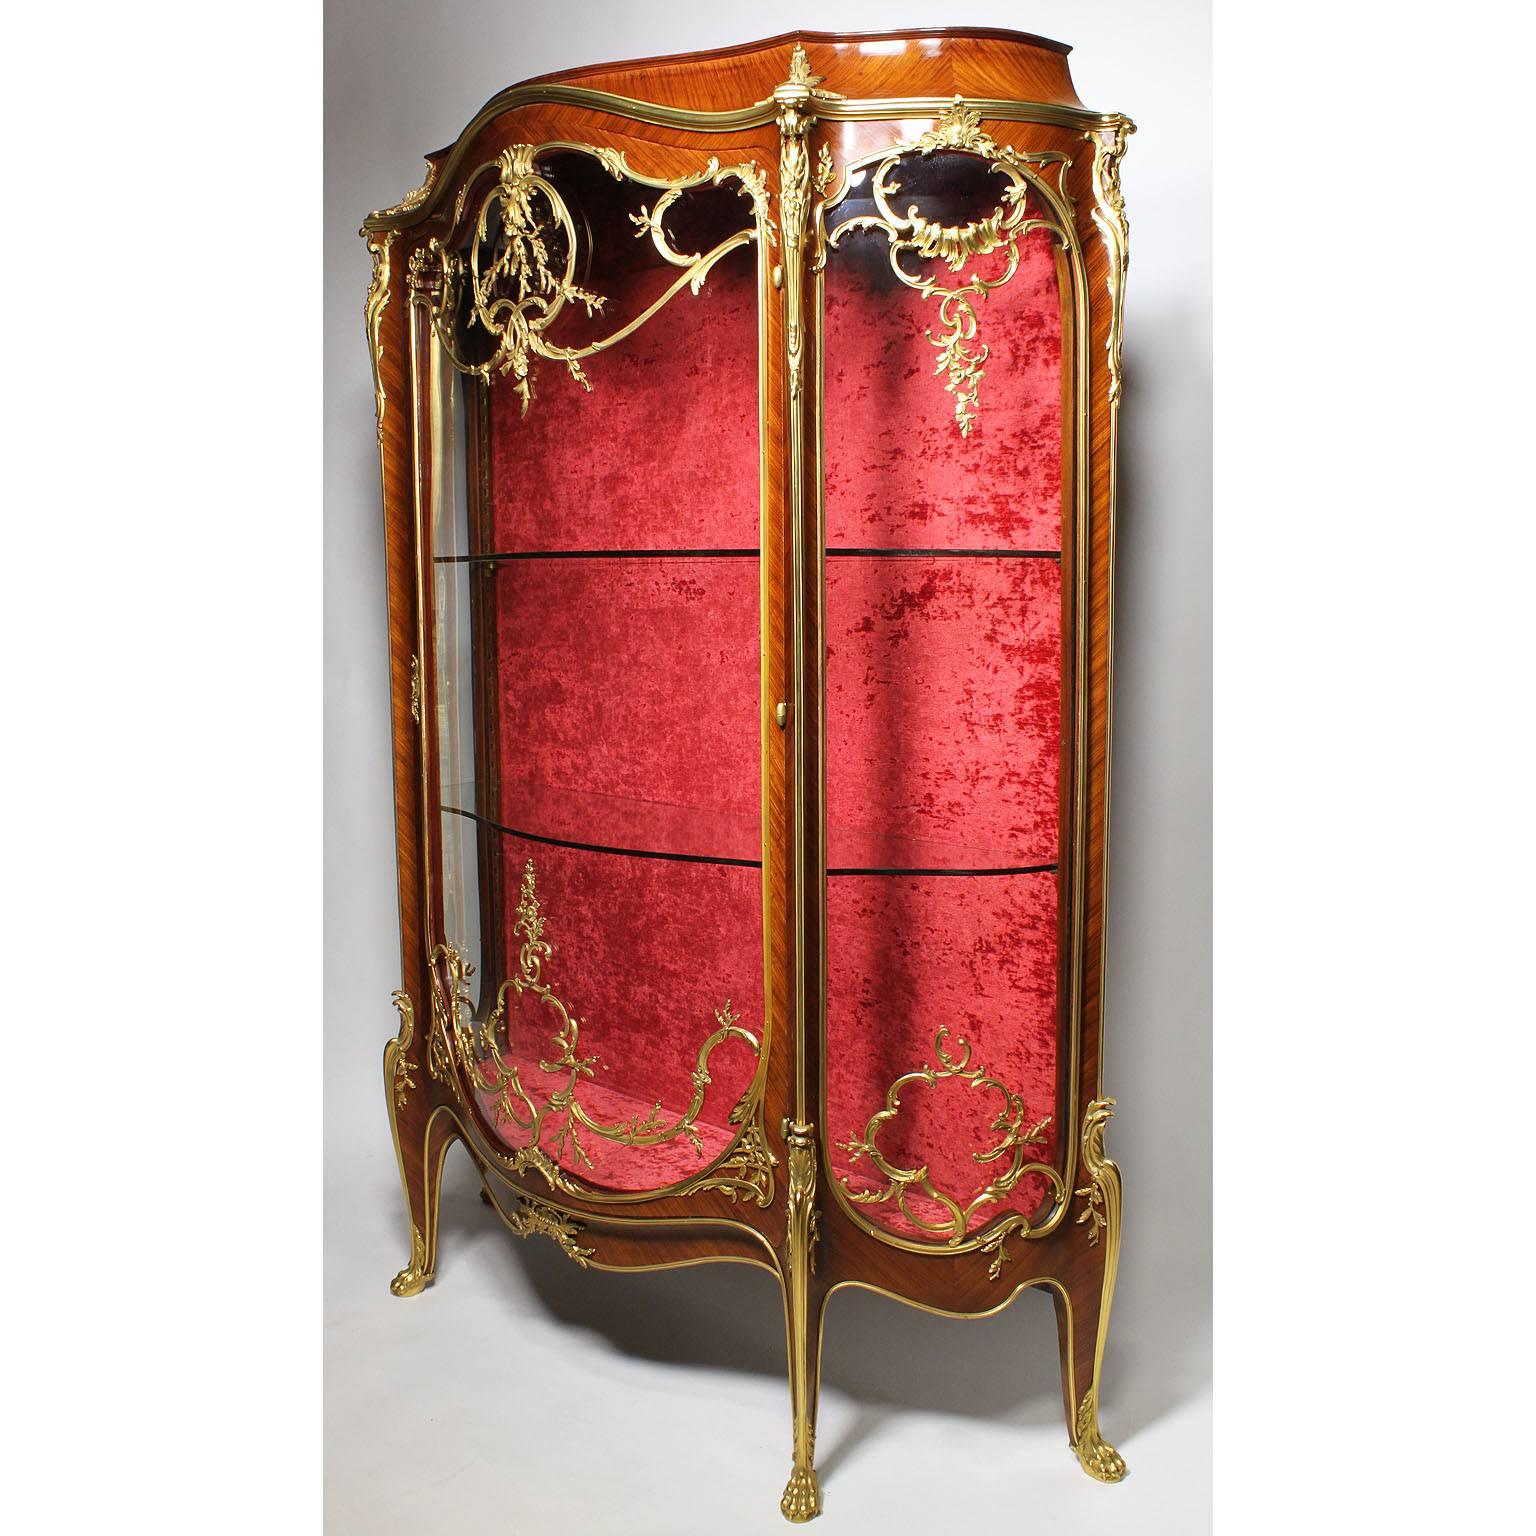 A fine French 19th-20th century Louis XV style Kingwood and ormolu-mounted single-door Vitrine, the demilune shaped cabinet with and arched bonnet, molded trim above a bombé glazed door framed with rocaille within a 